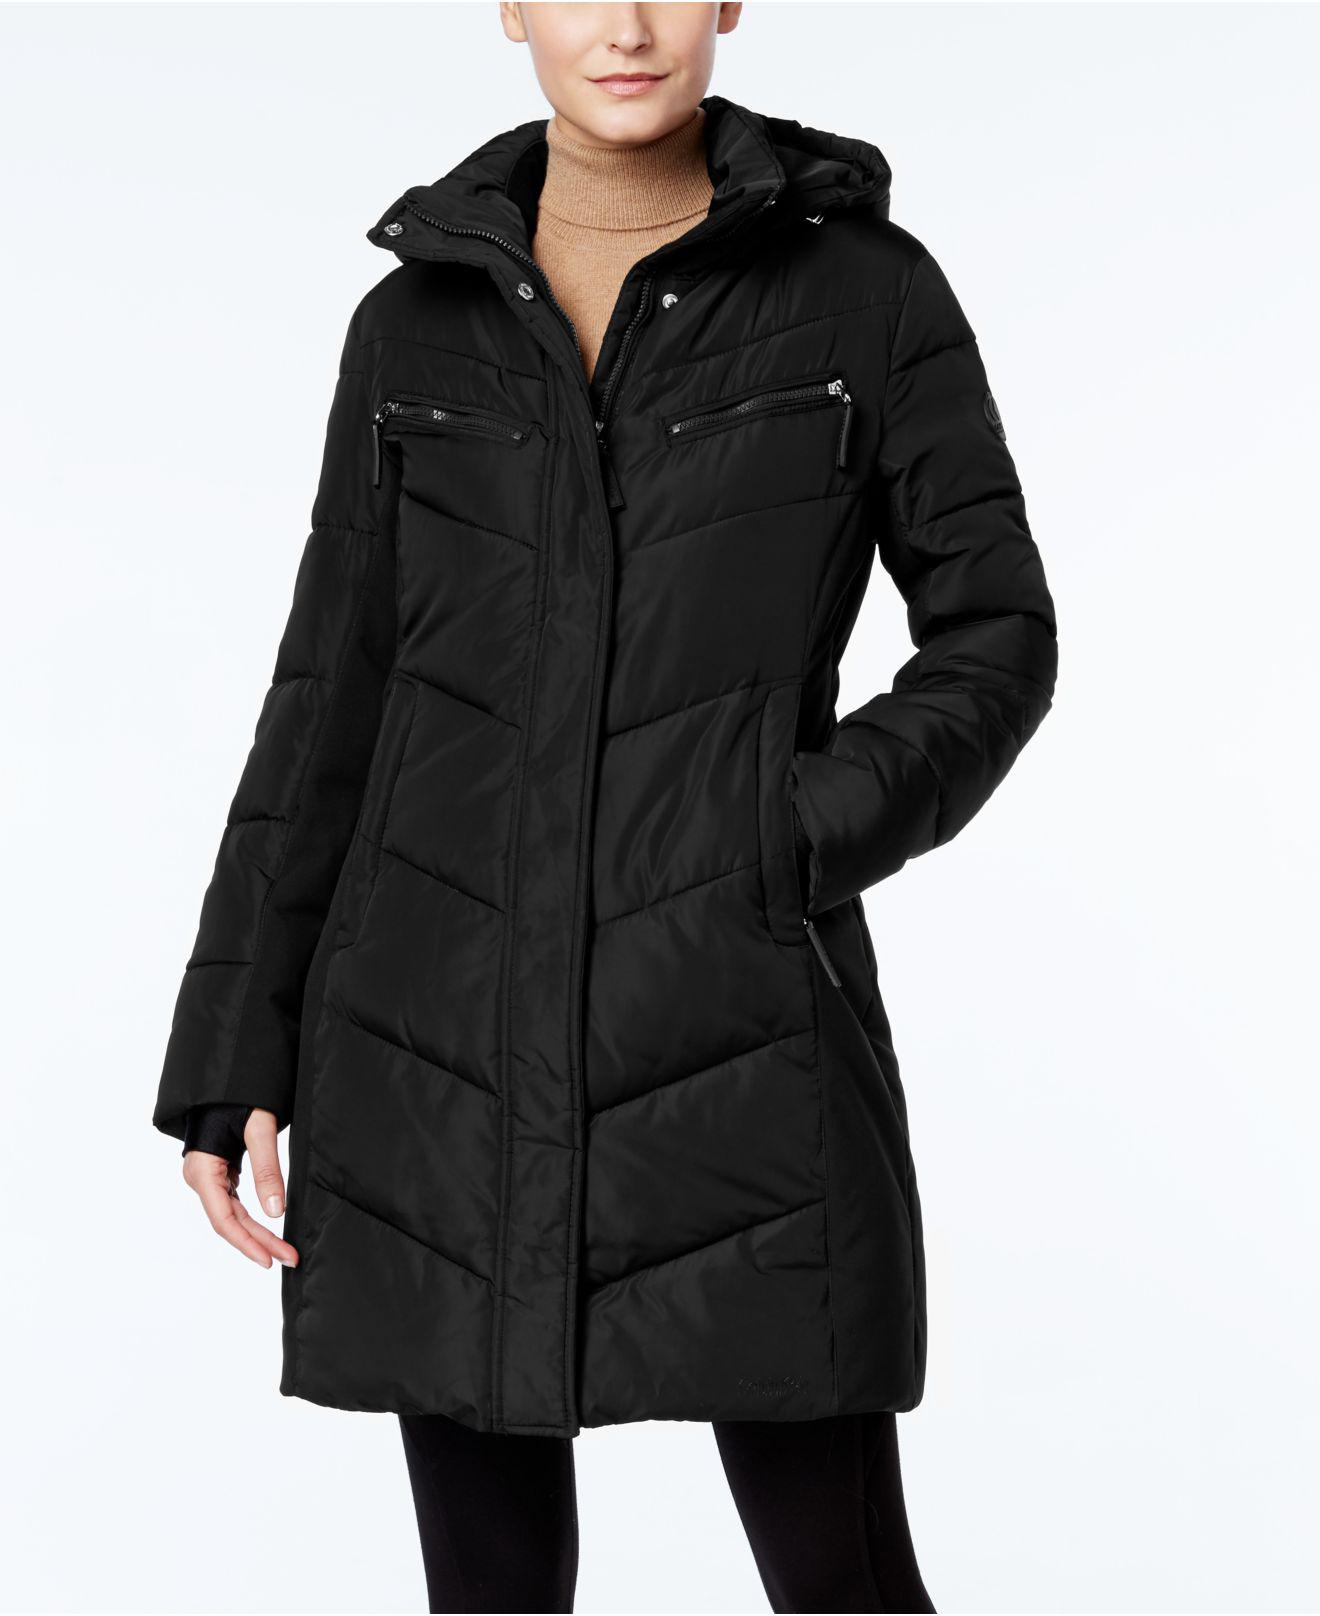 Lyst - Calvin klein Hooded Quilted Colorblock Puffer Coat in Black